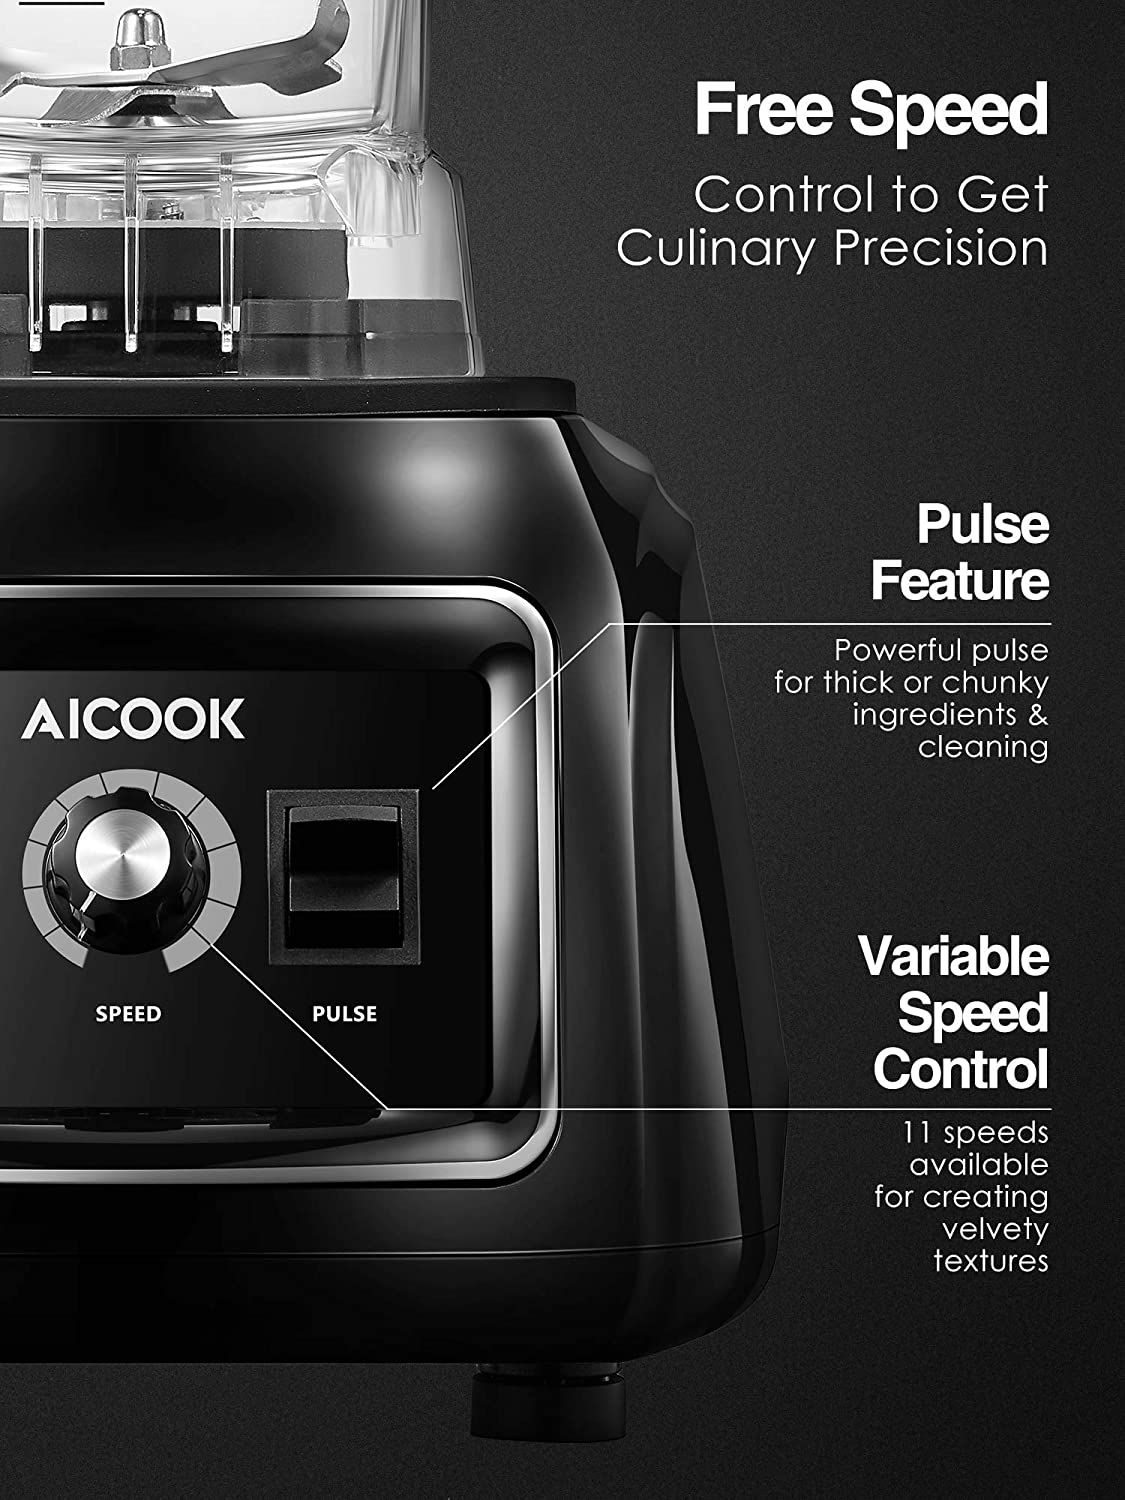 Professional Countertop Blender, AICOOK 1800W Smoothie Maker Blender for Kitchen 11-Speed Control Food Processor Blender for Shakes, Free Speed